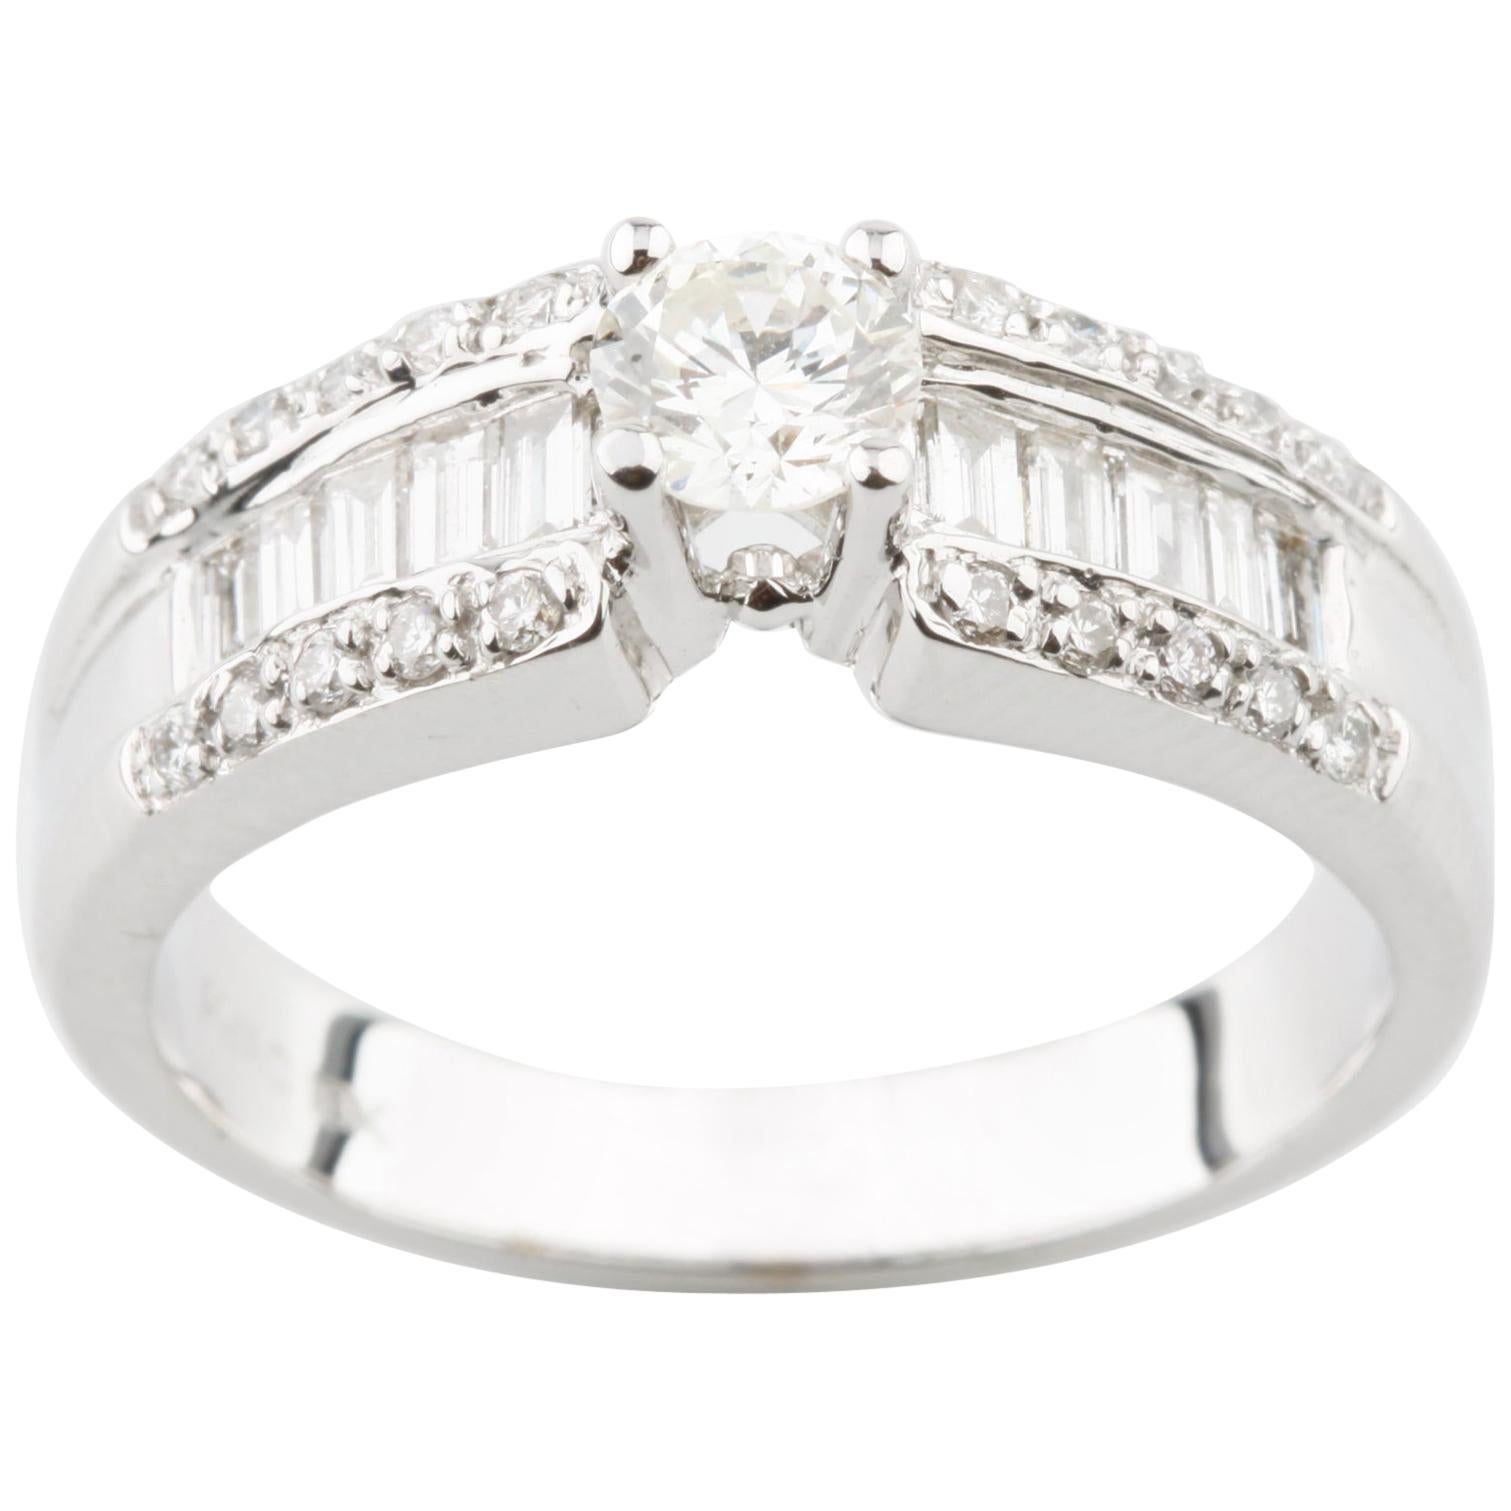 0.37 Carat Round Diamond Solitaire Ring in White Gold with Accents For Sale